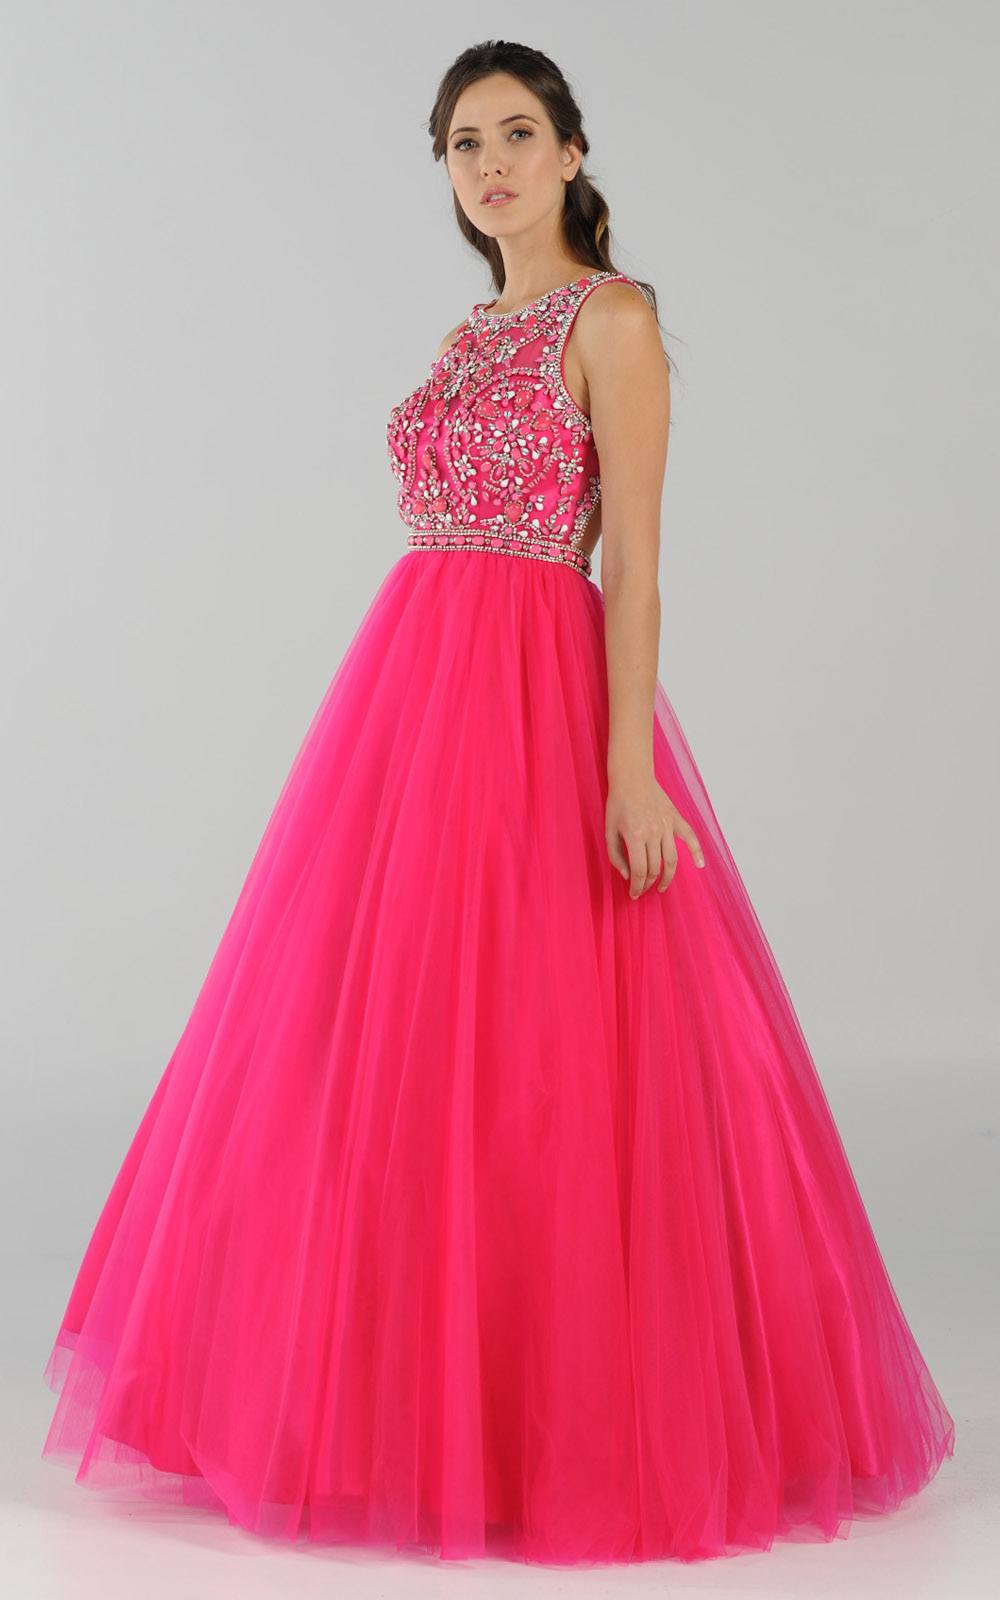 Poly USA 7940 Cut-Out Back Beaded Illusion Bodice Mesh Ball Gown Sleeveless Fuchsia